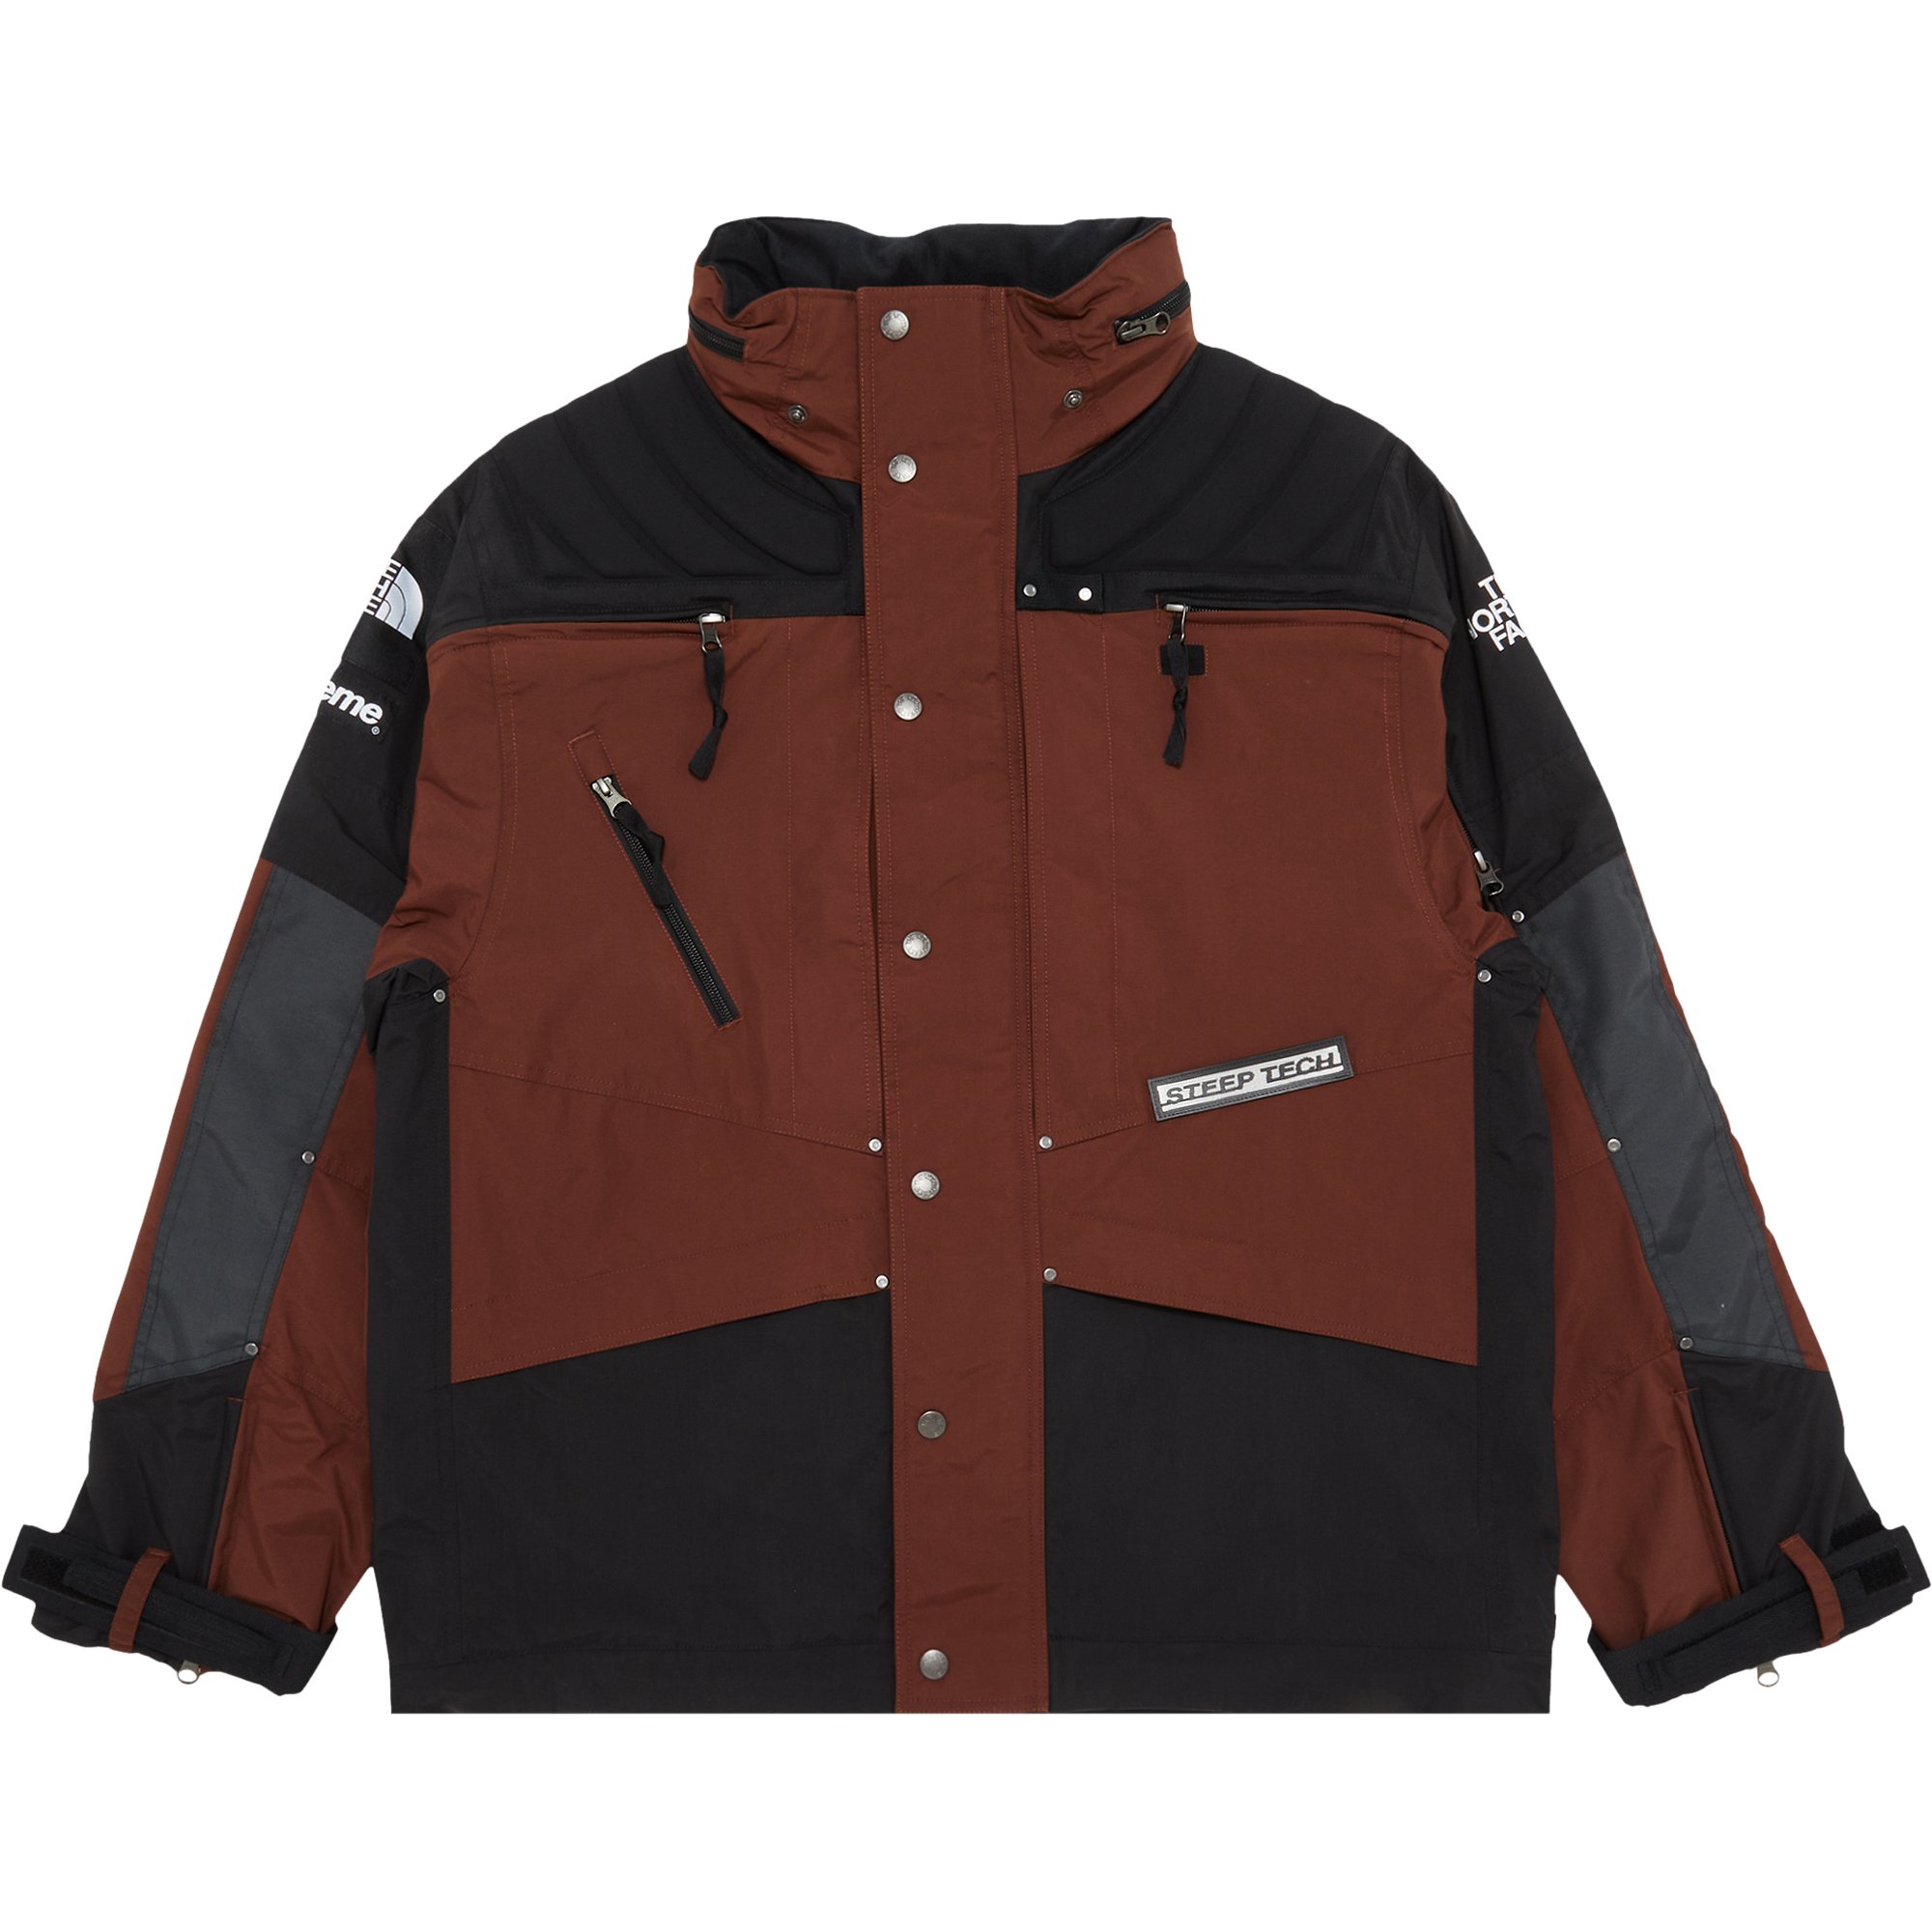 Buy Supreme x The North Face Steep Tech Apogee Jacket 'Brown ...